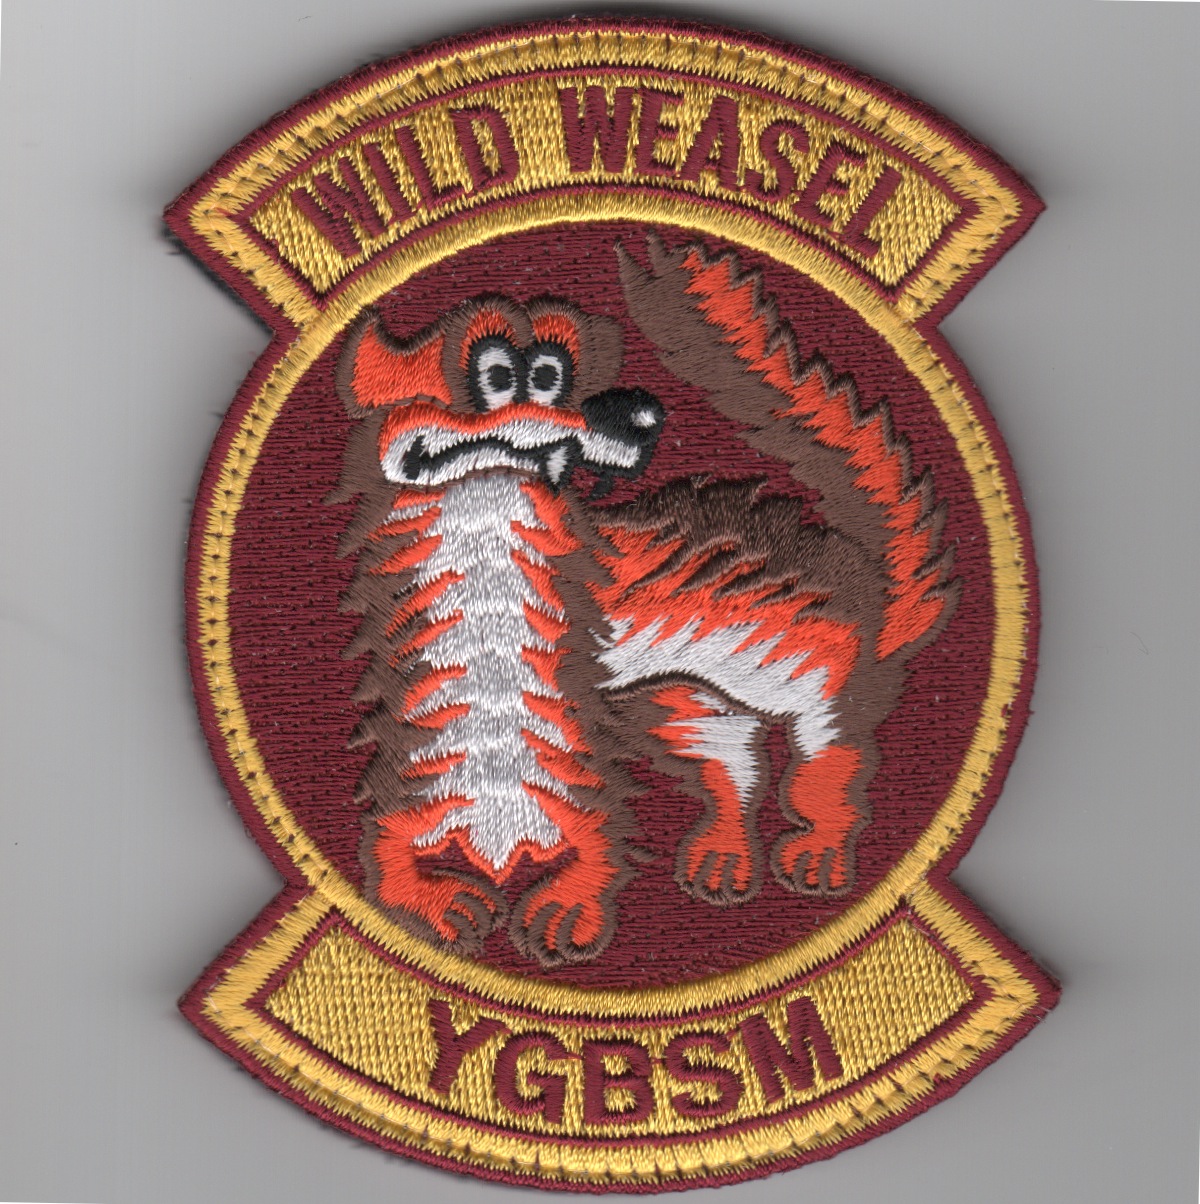 WILD WEASEL F4 US AIR FORCE USAF LAPEL PIN BADGE 1 INCH 